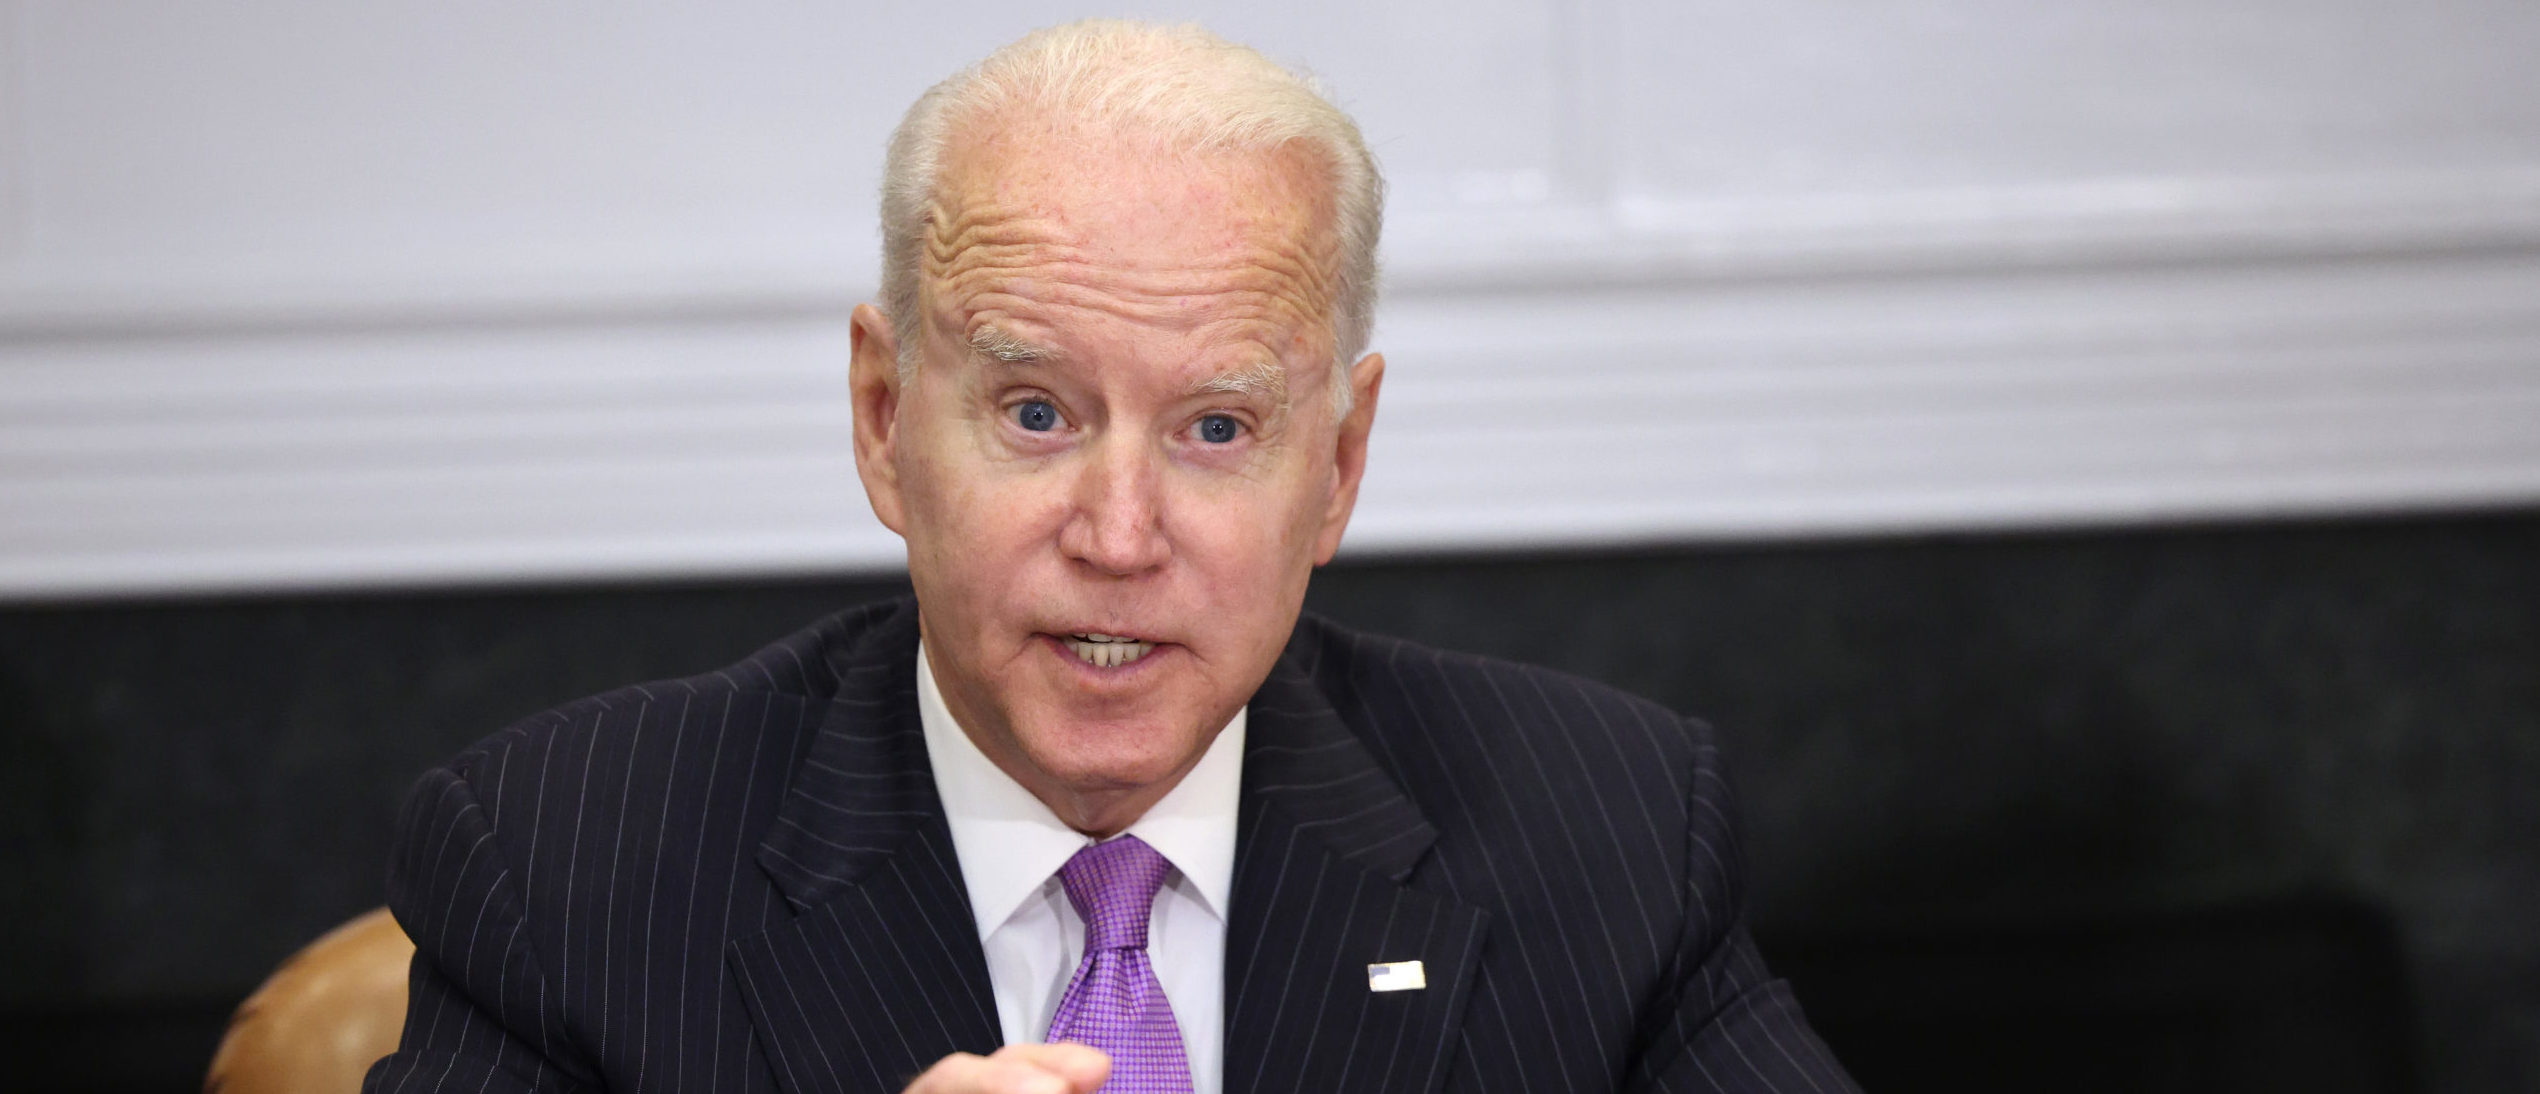 Biden’s Strategy For Combating Surge In Crime Focuses Largely On Combating ‘Gun Violence’